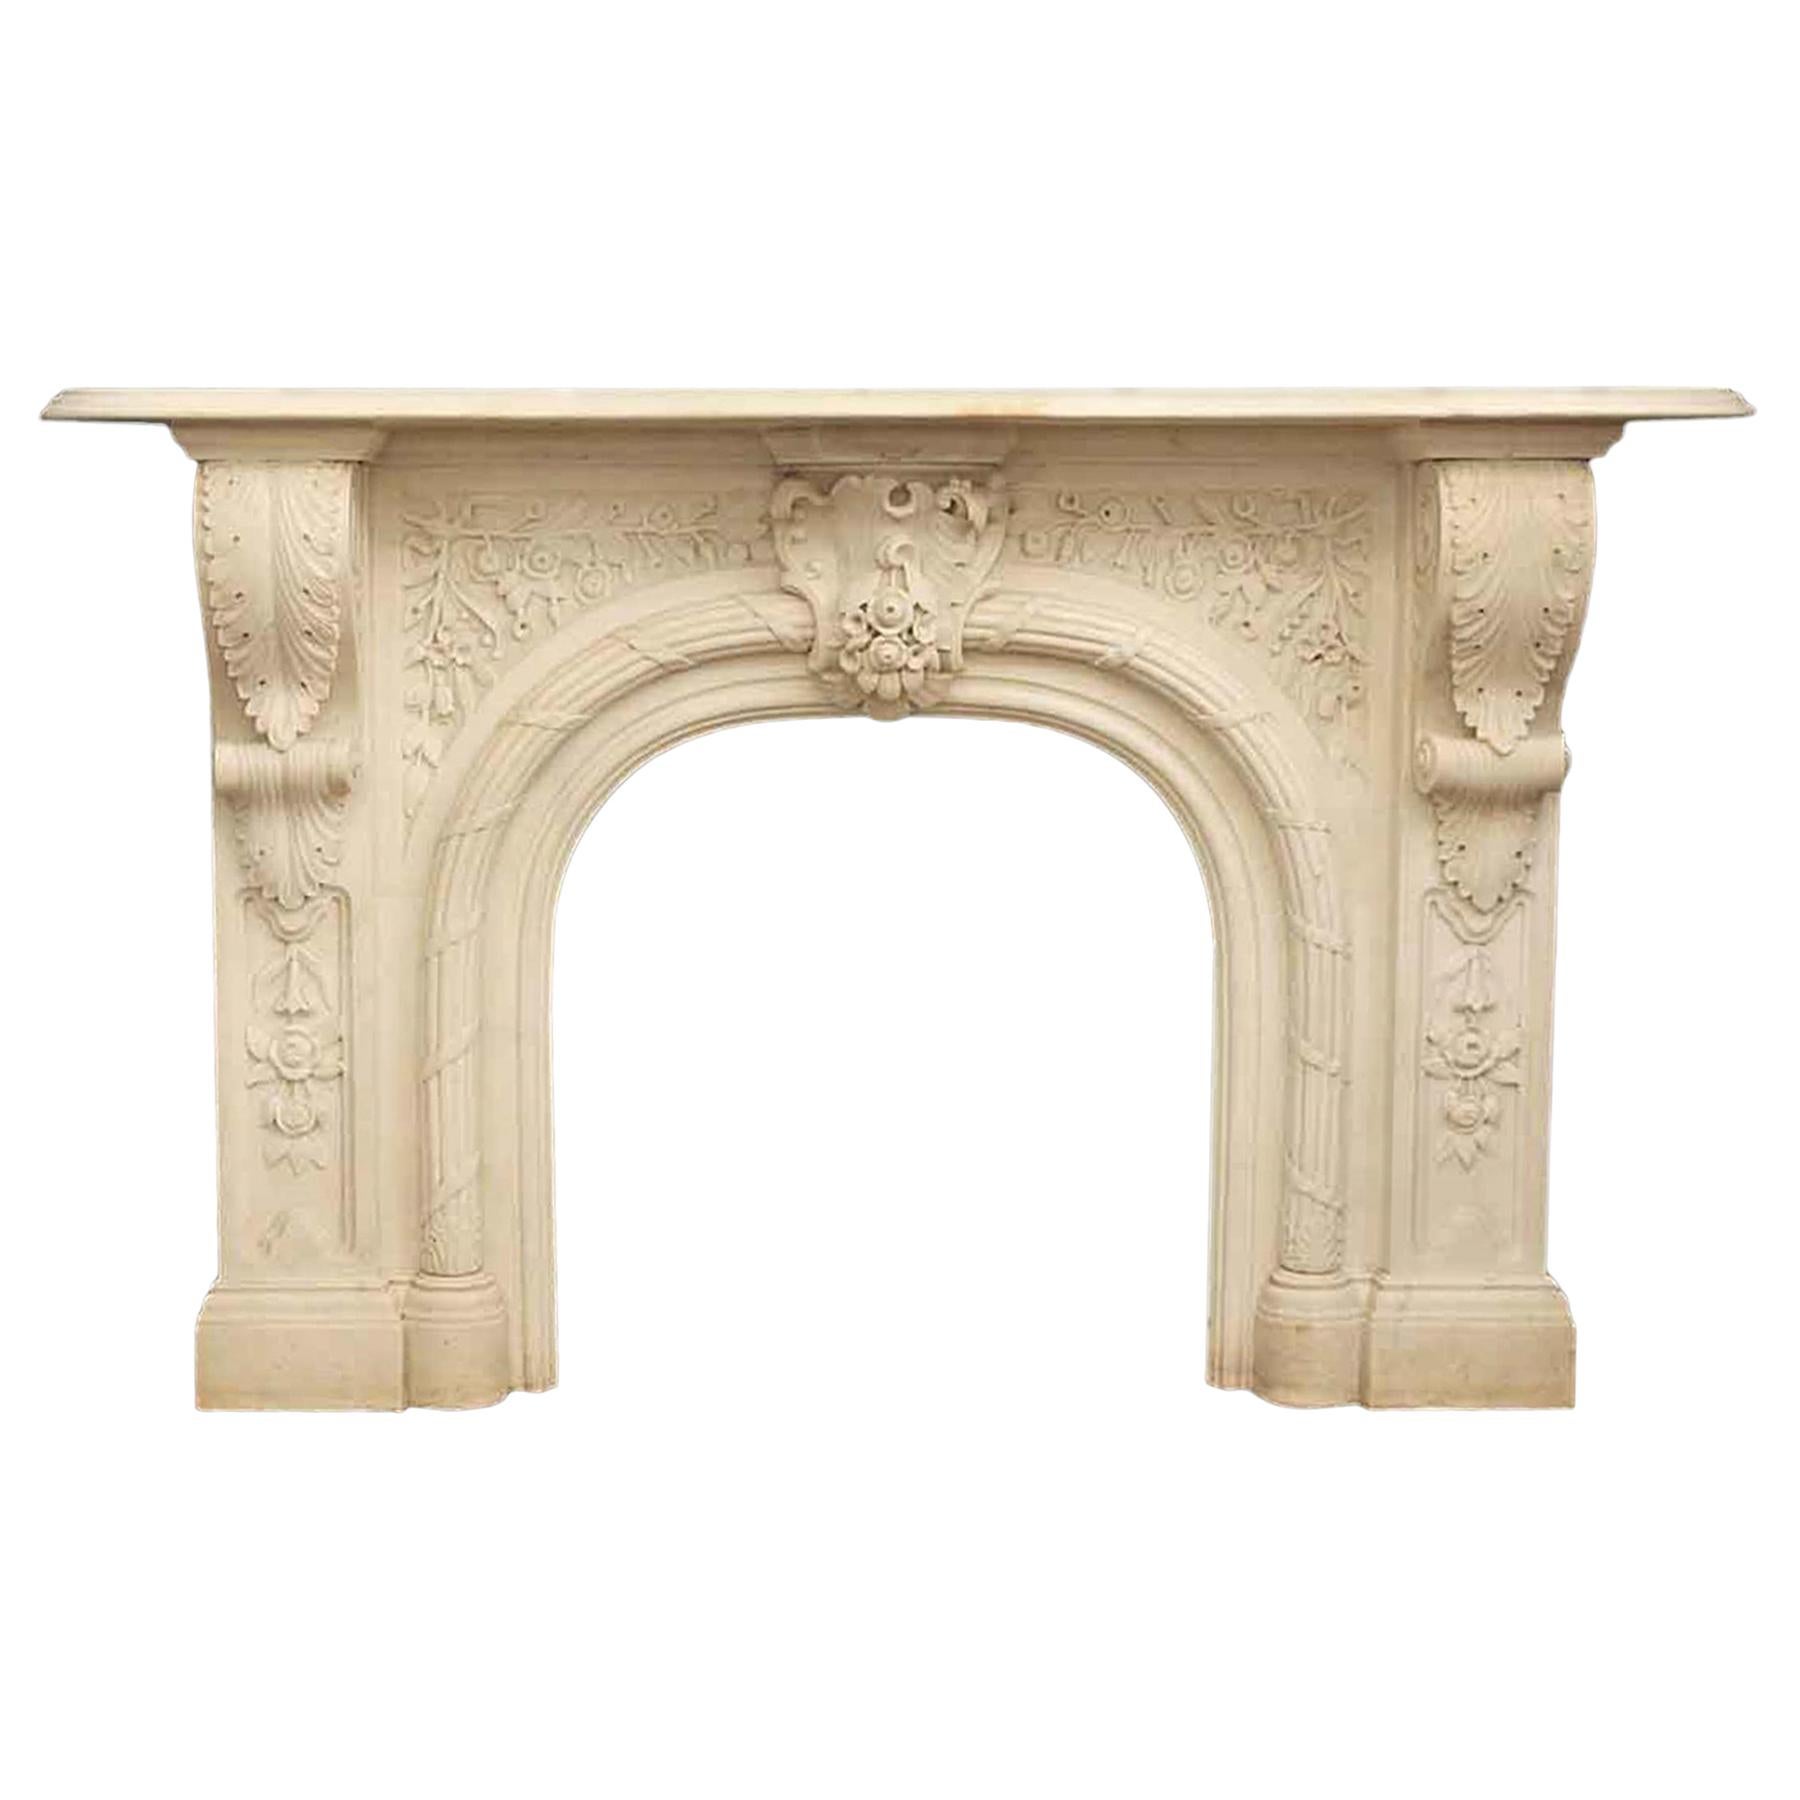 A splendid Victorian arched marble mantel from the early 1800s stands adorned with intricate Baroque center embellishments featuring elegantly carved rosebud florals and leaves. The center arch is adorned with ornate rope and ribbon detailing, while